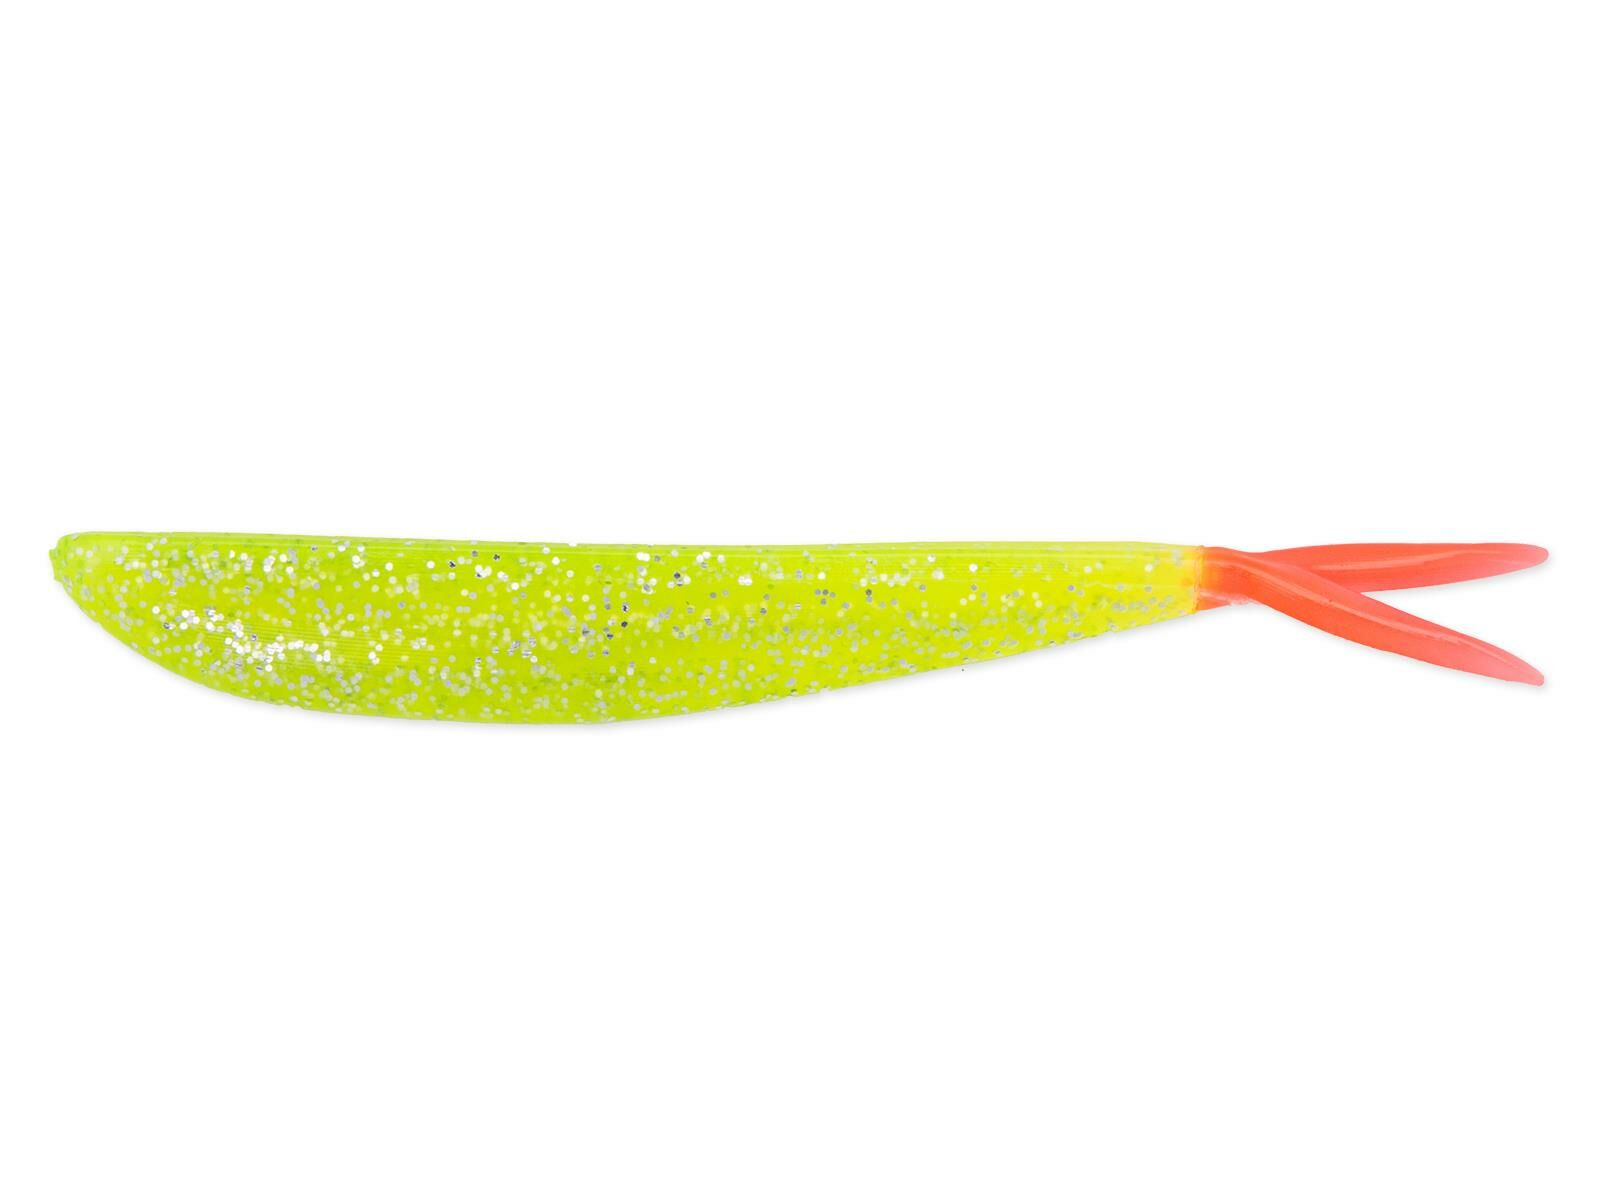 4" Fin-S Fish (Tail Colors) - Chartreuse Flake FT